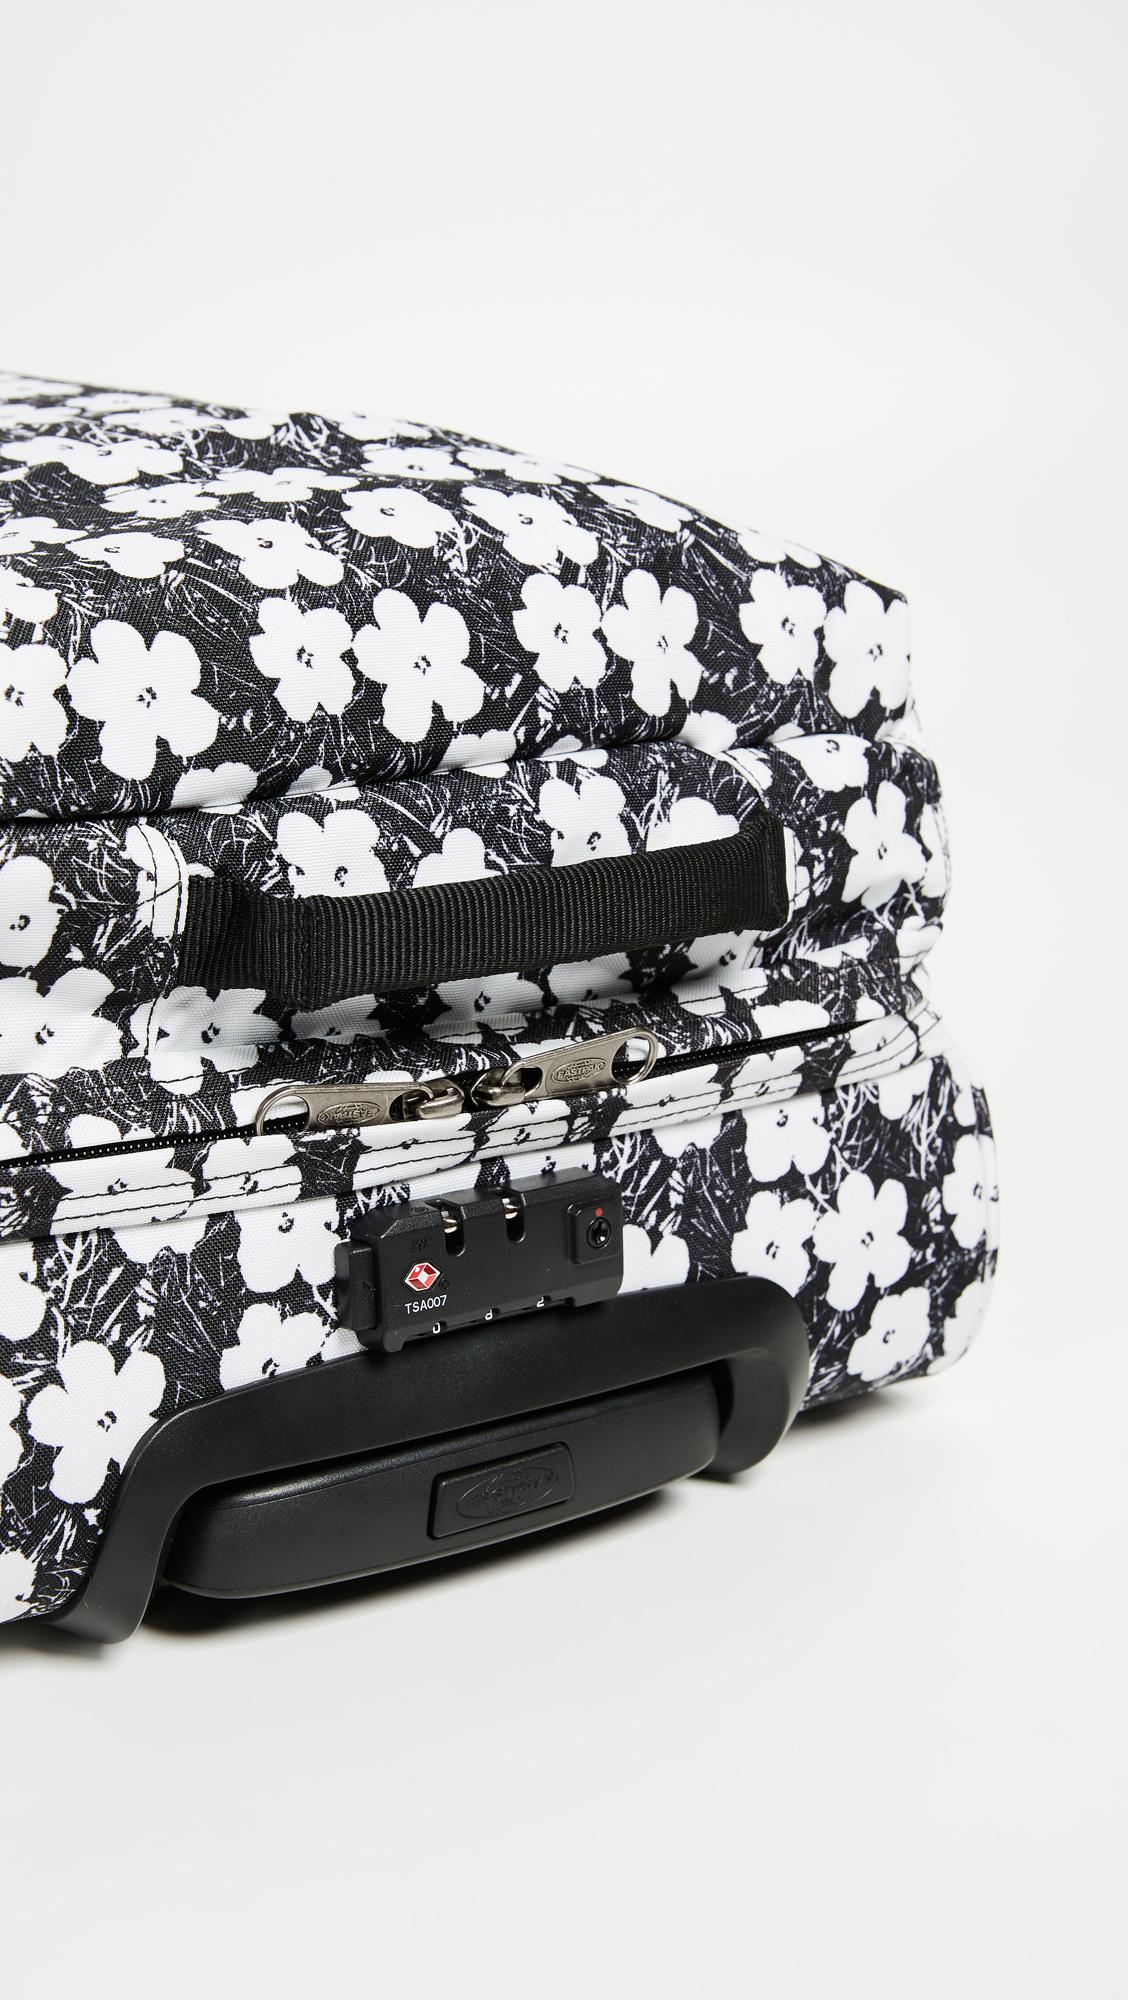 Eastpak Tranverz Andy Warhol Duffel Suitcase in aw Floral (Black 